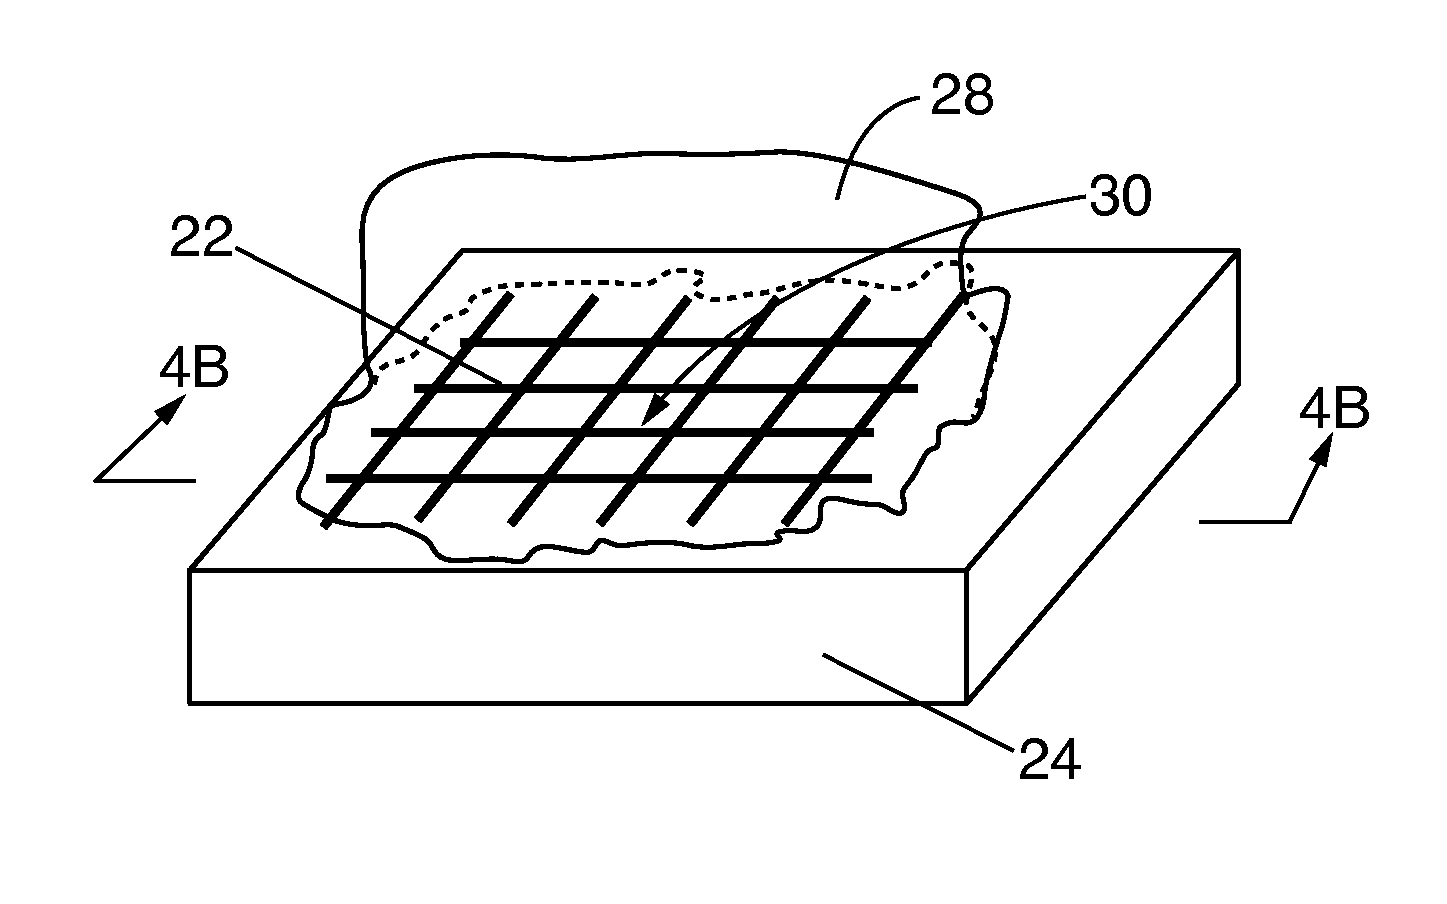 Method for holding brazing material during a brazing operation